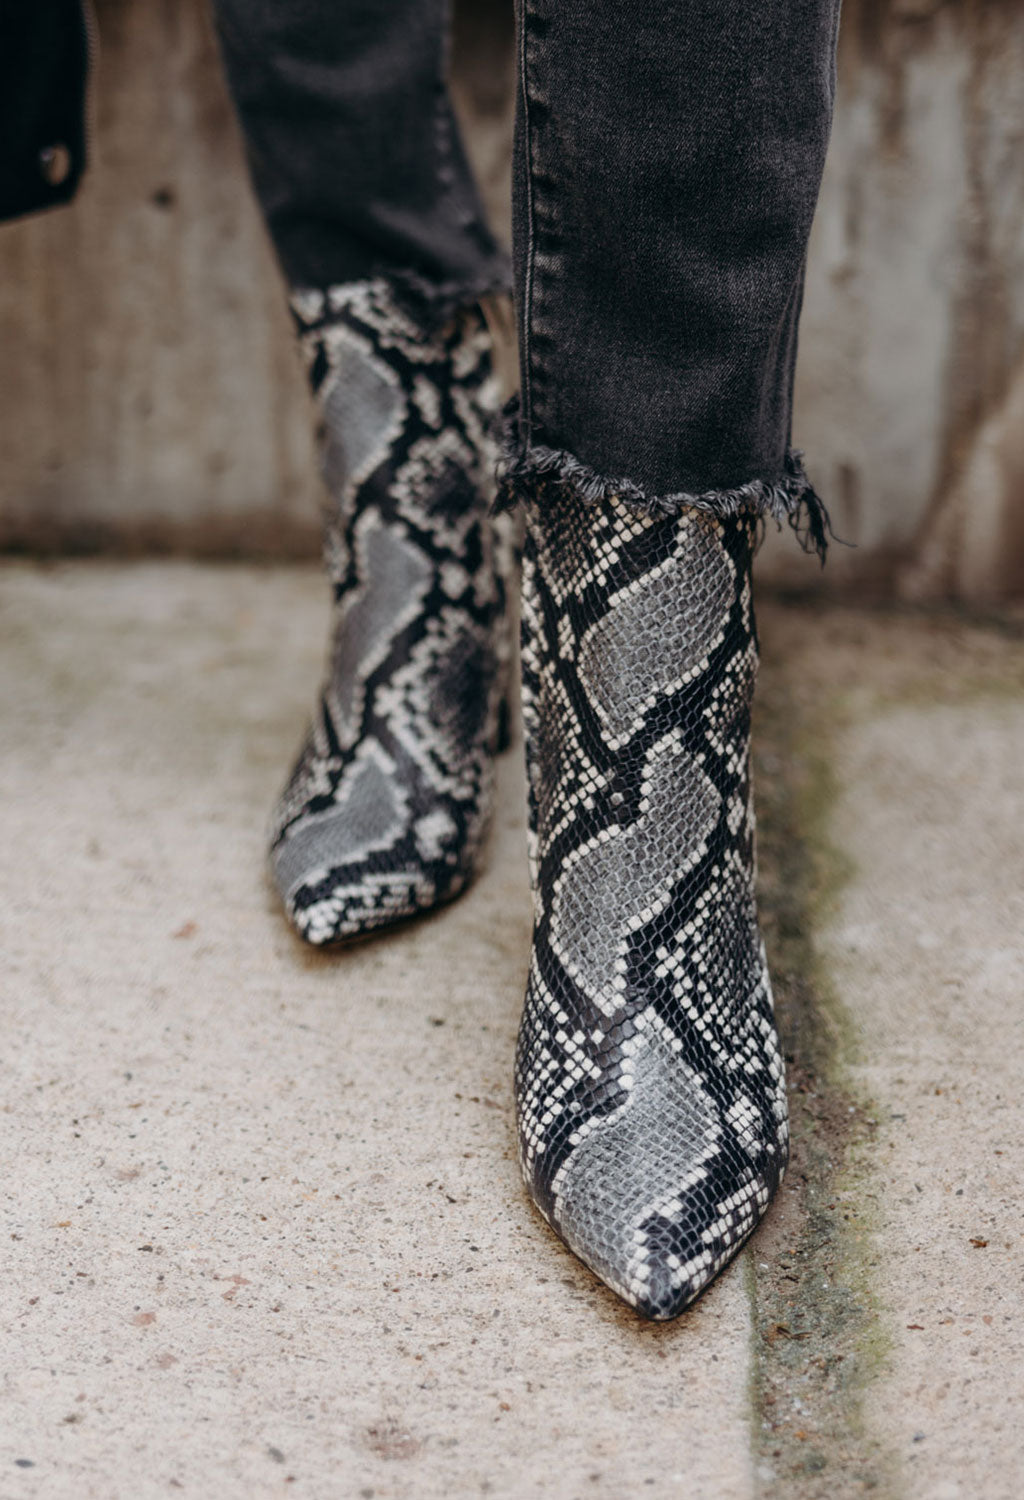 marc fisher snake boots